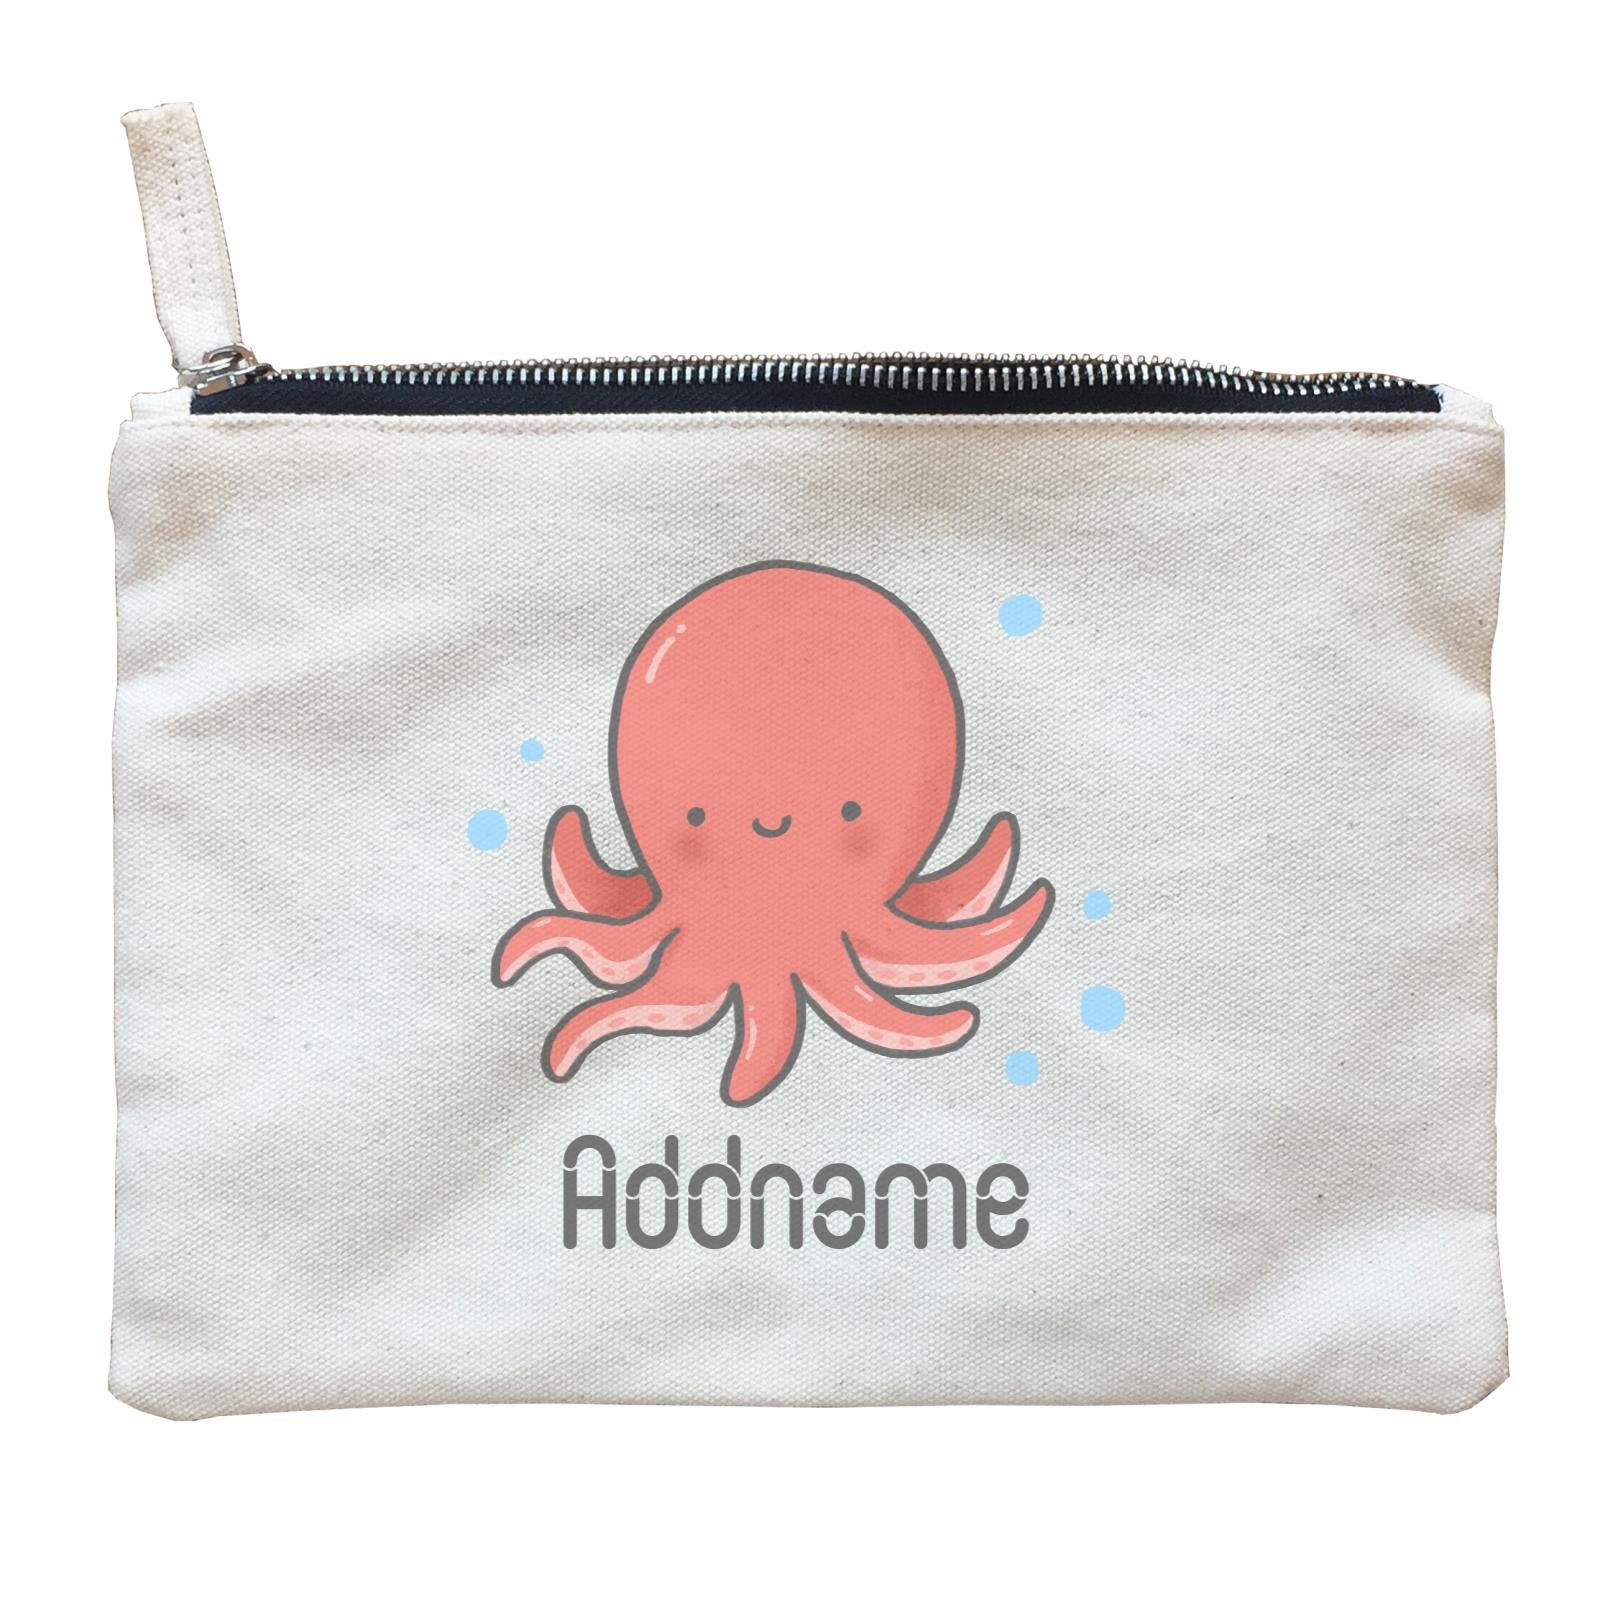 Cute Hand Drawn Style Octopus Addname Zipper Pouch